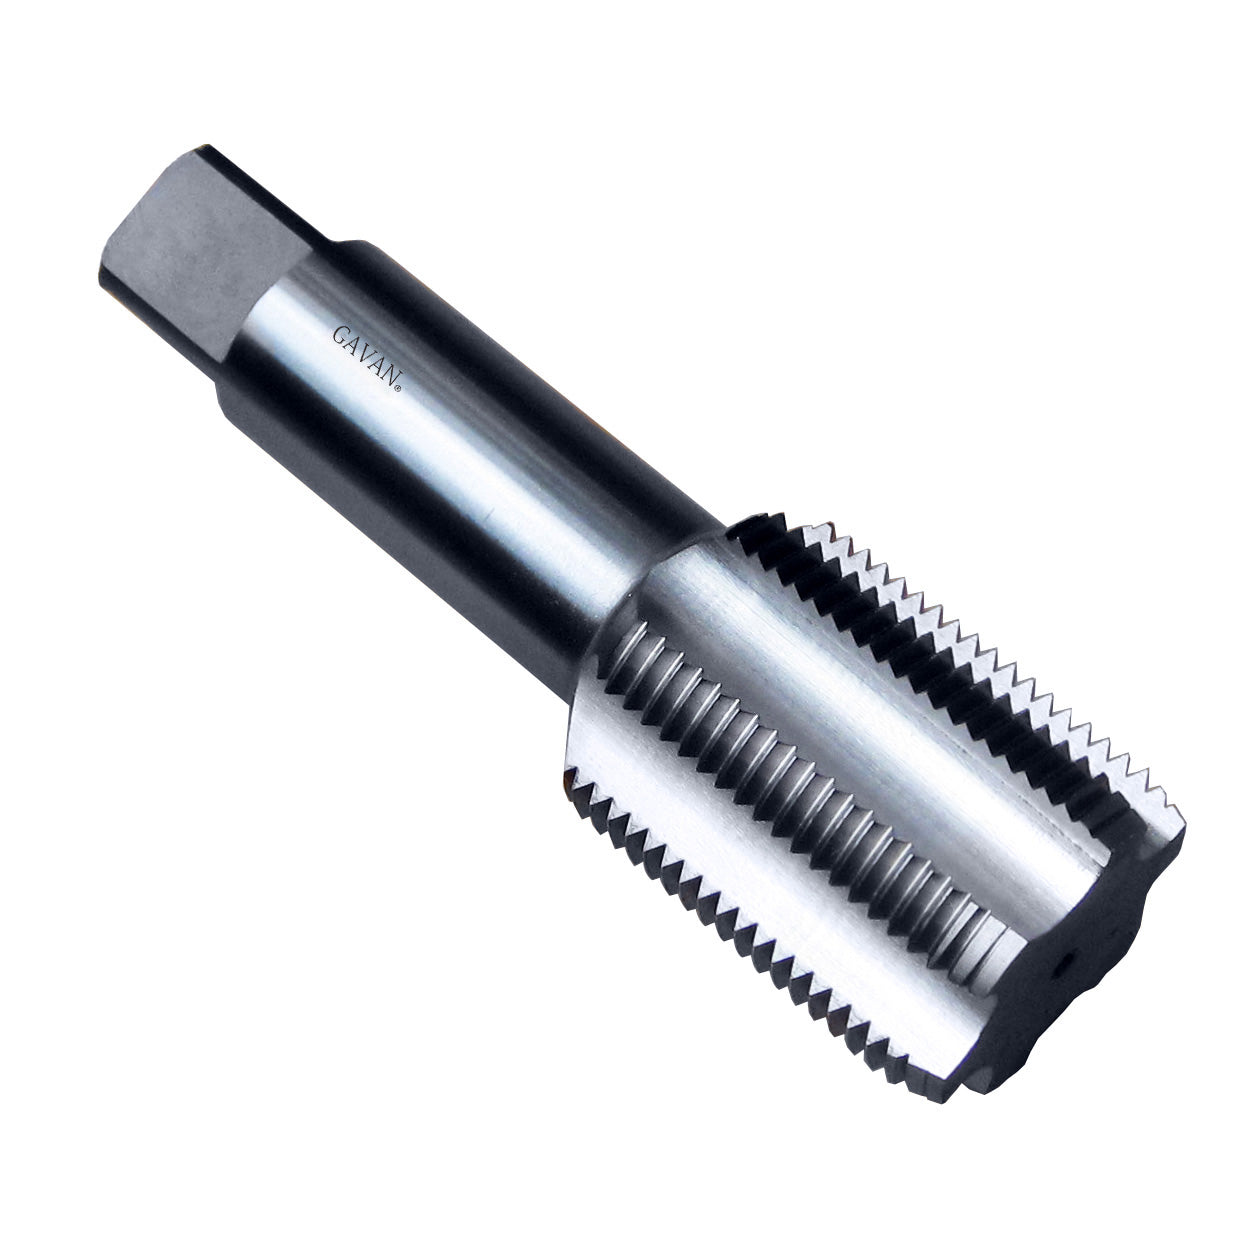 1 15/16" - 12 HSS Unified Right Hand Thread Tap